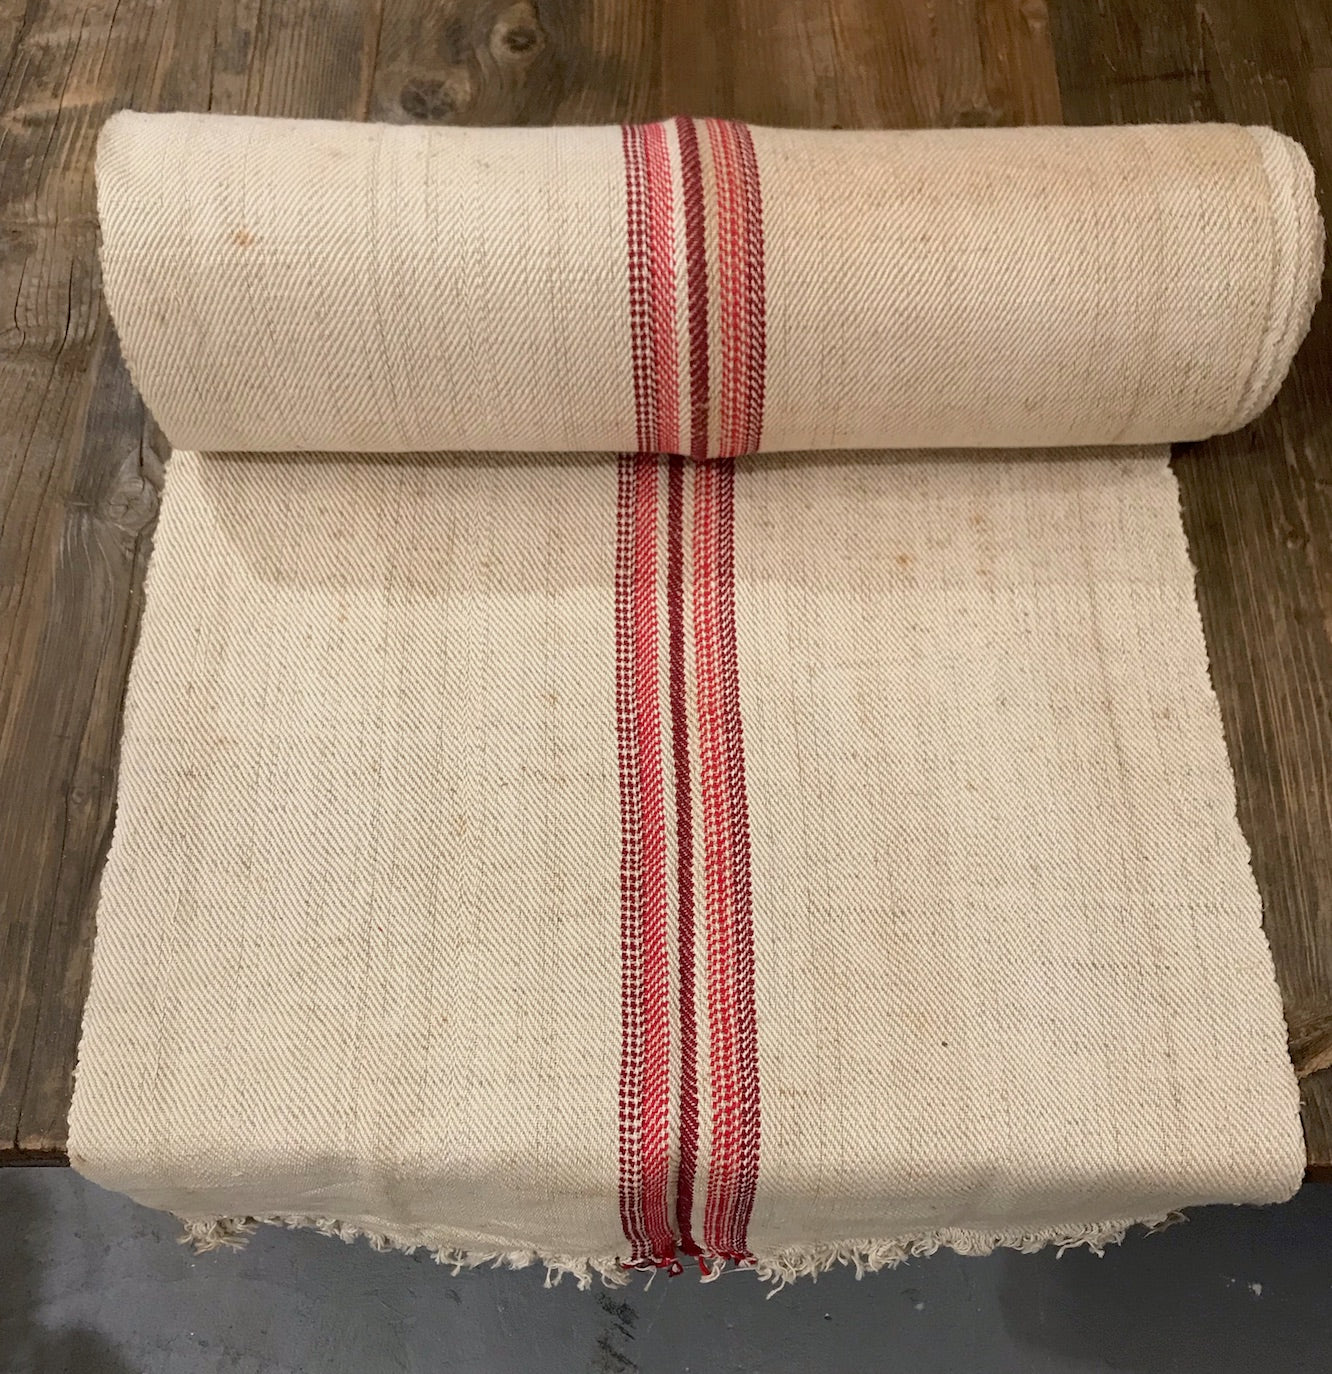 Vintage  Linen/Hemp Grain Sack Material  1940s  #3672F  (Read Information About This Item)  Byron